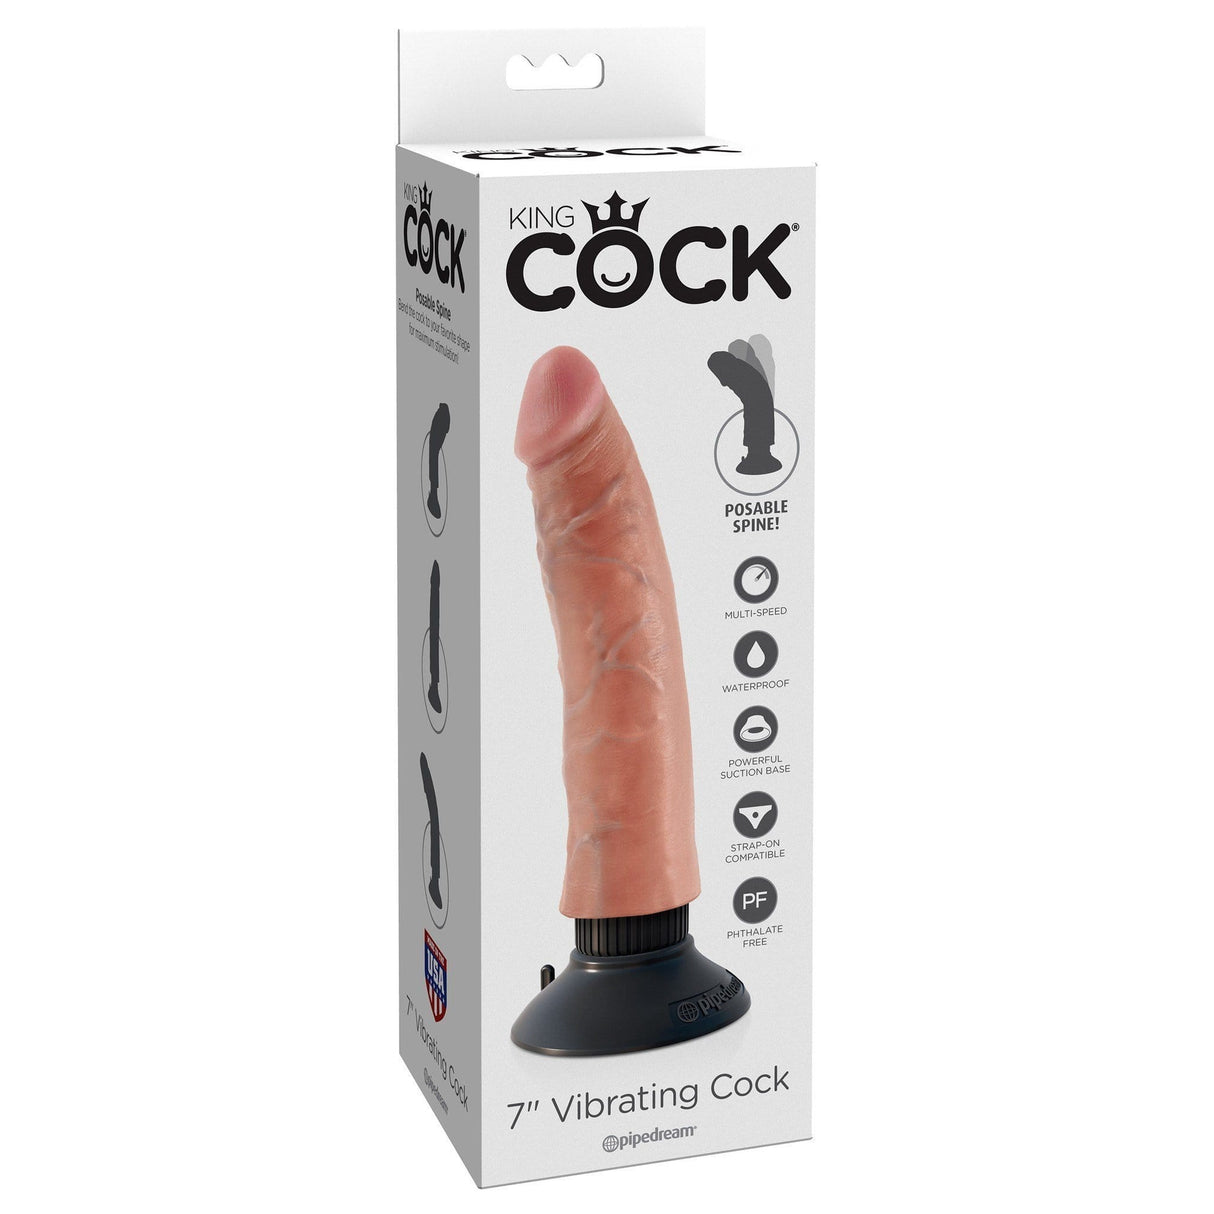 Pipedream - King Cock 7" Vibrating Cock (Beige) PD1535 CherryAffairs